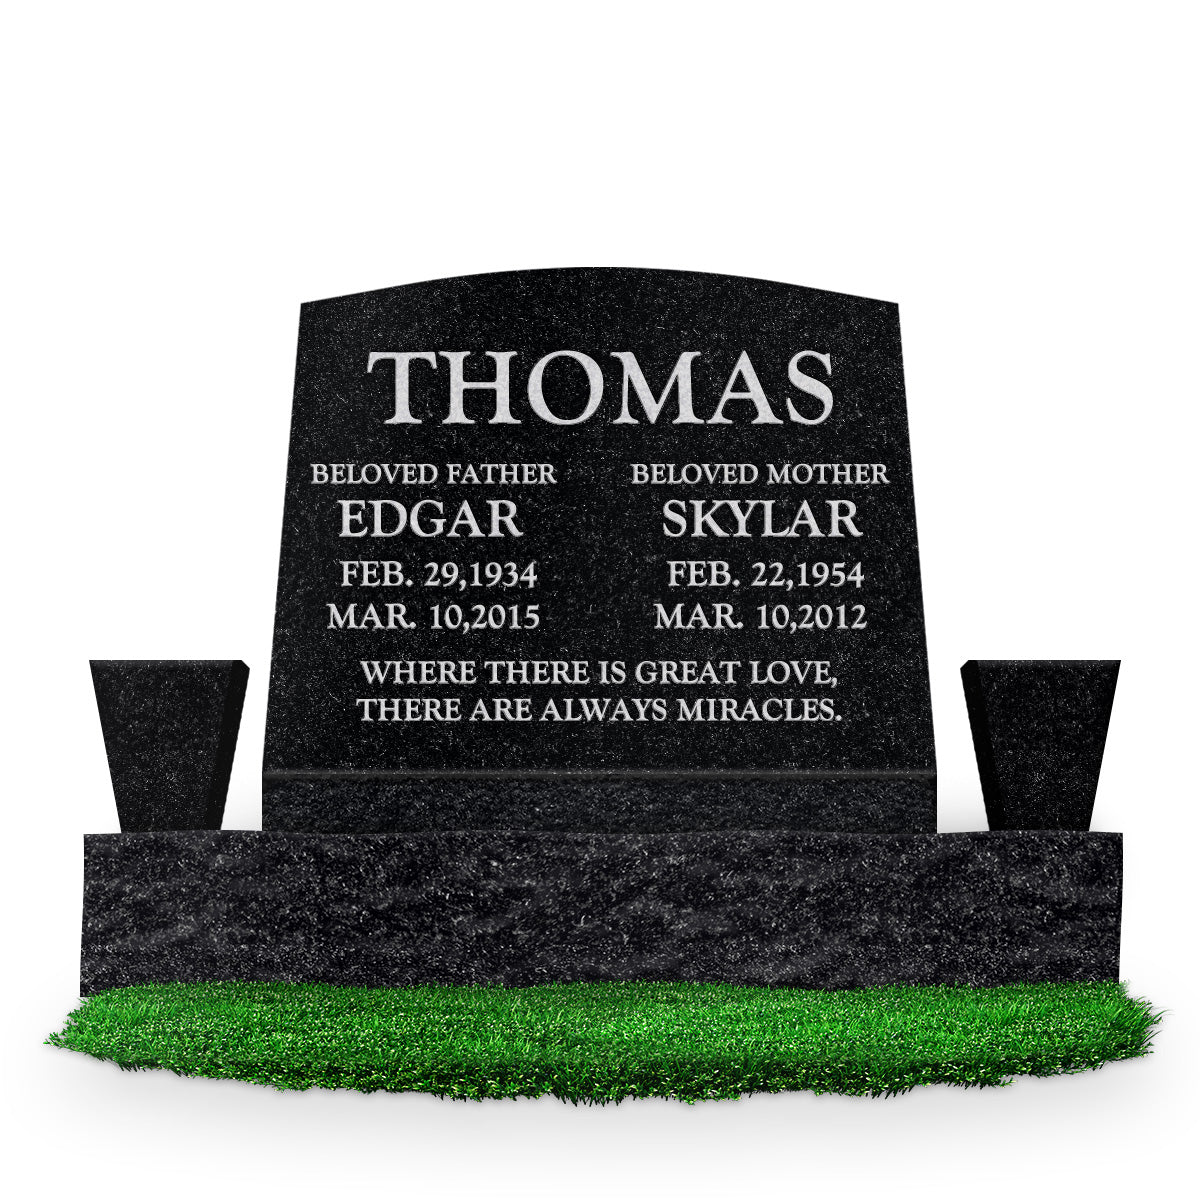 20″ x 10″ x 16″ Serp Top Slant Headstone: polished front and back; 34″ base; two square tapered vases; Companion/Text